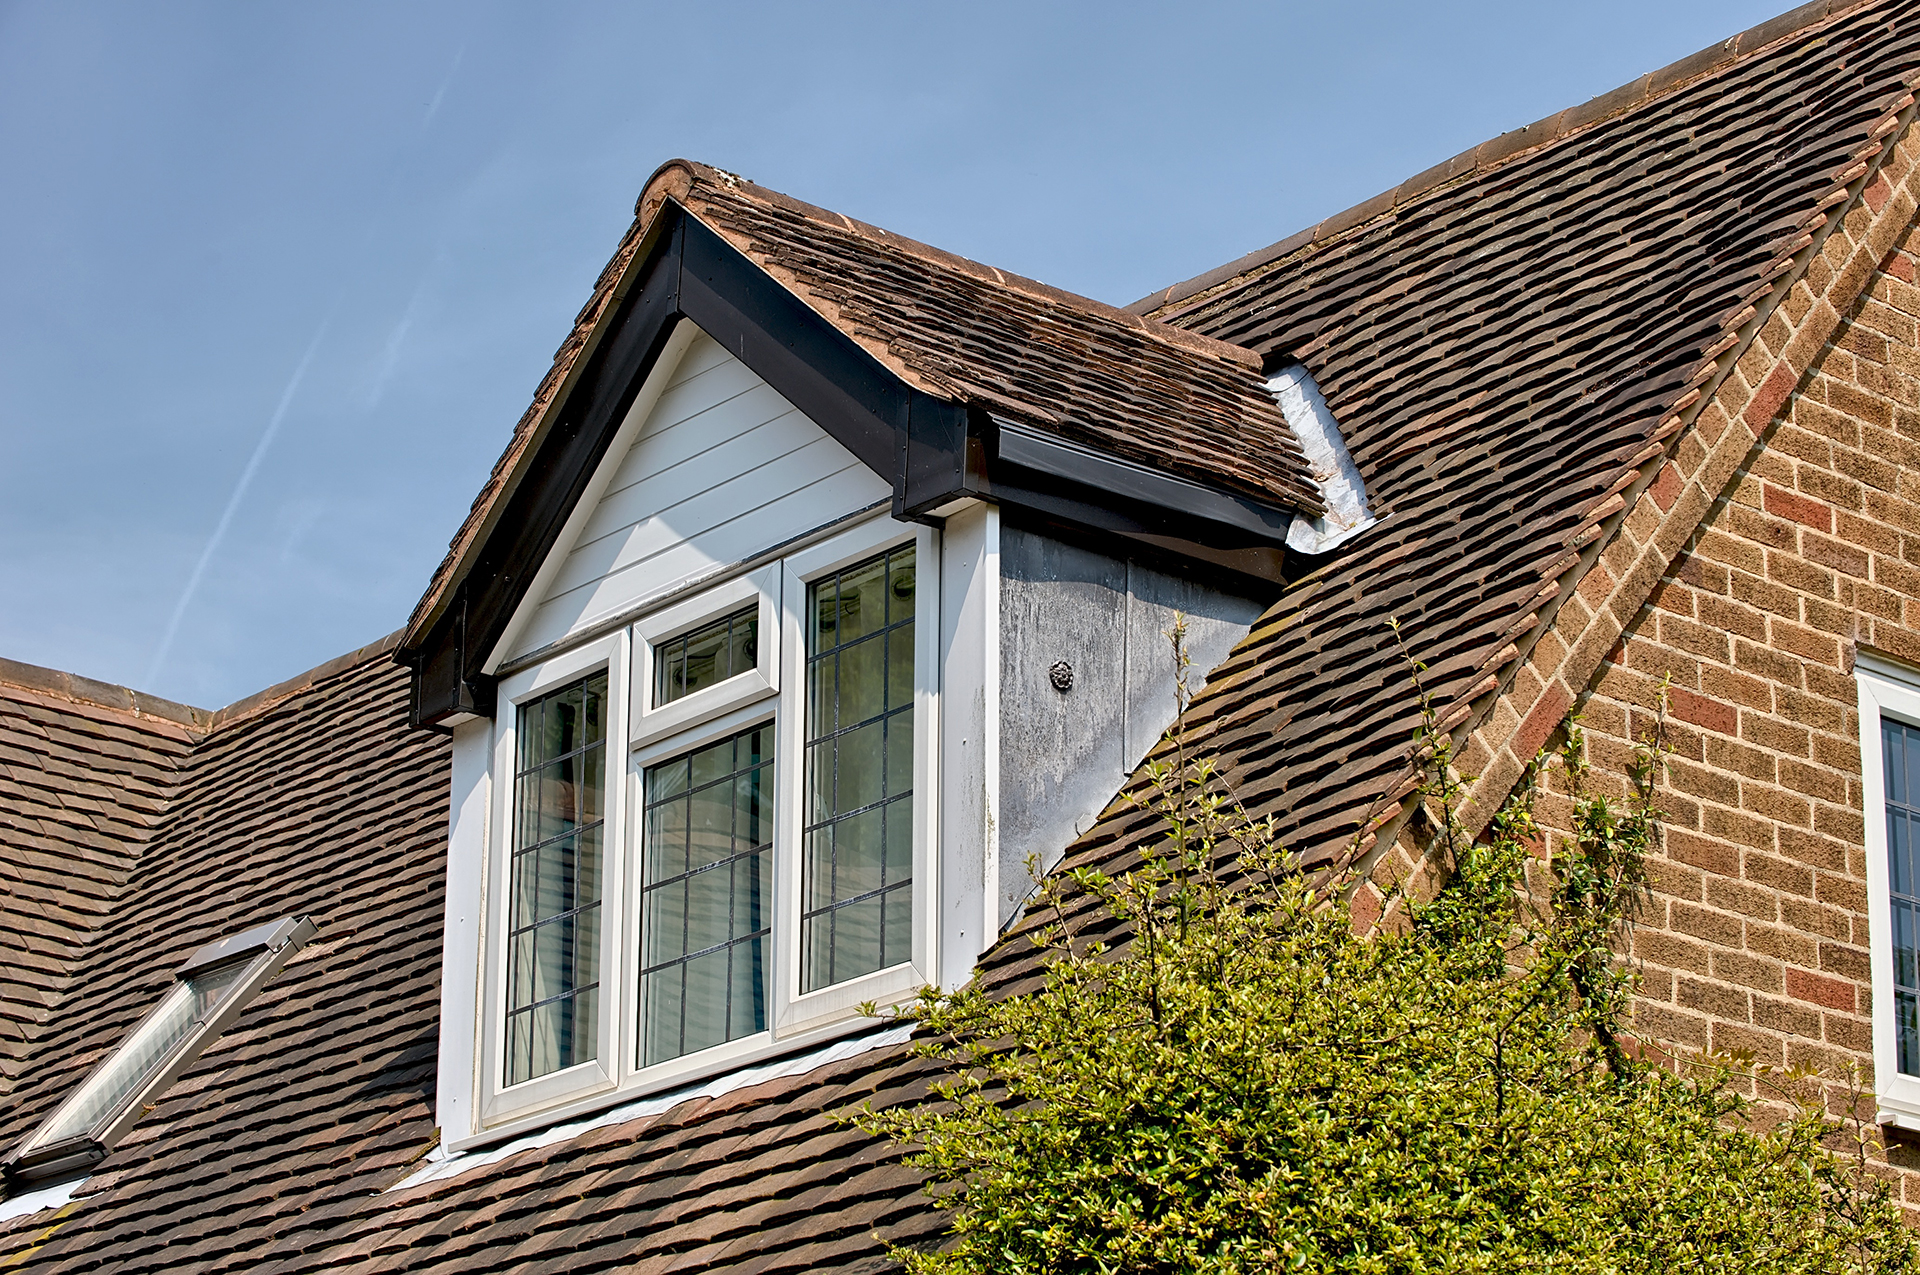 UPVC fascia boards and guttering